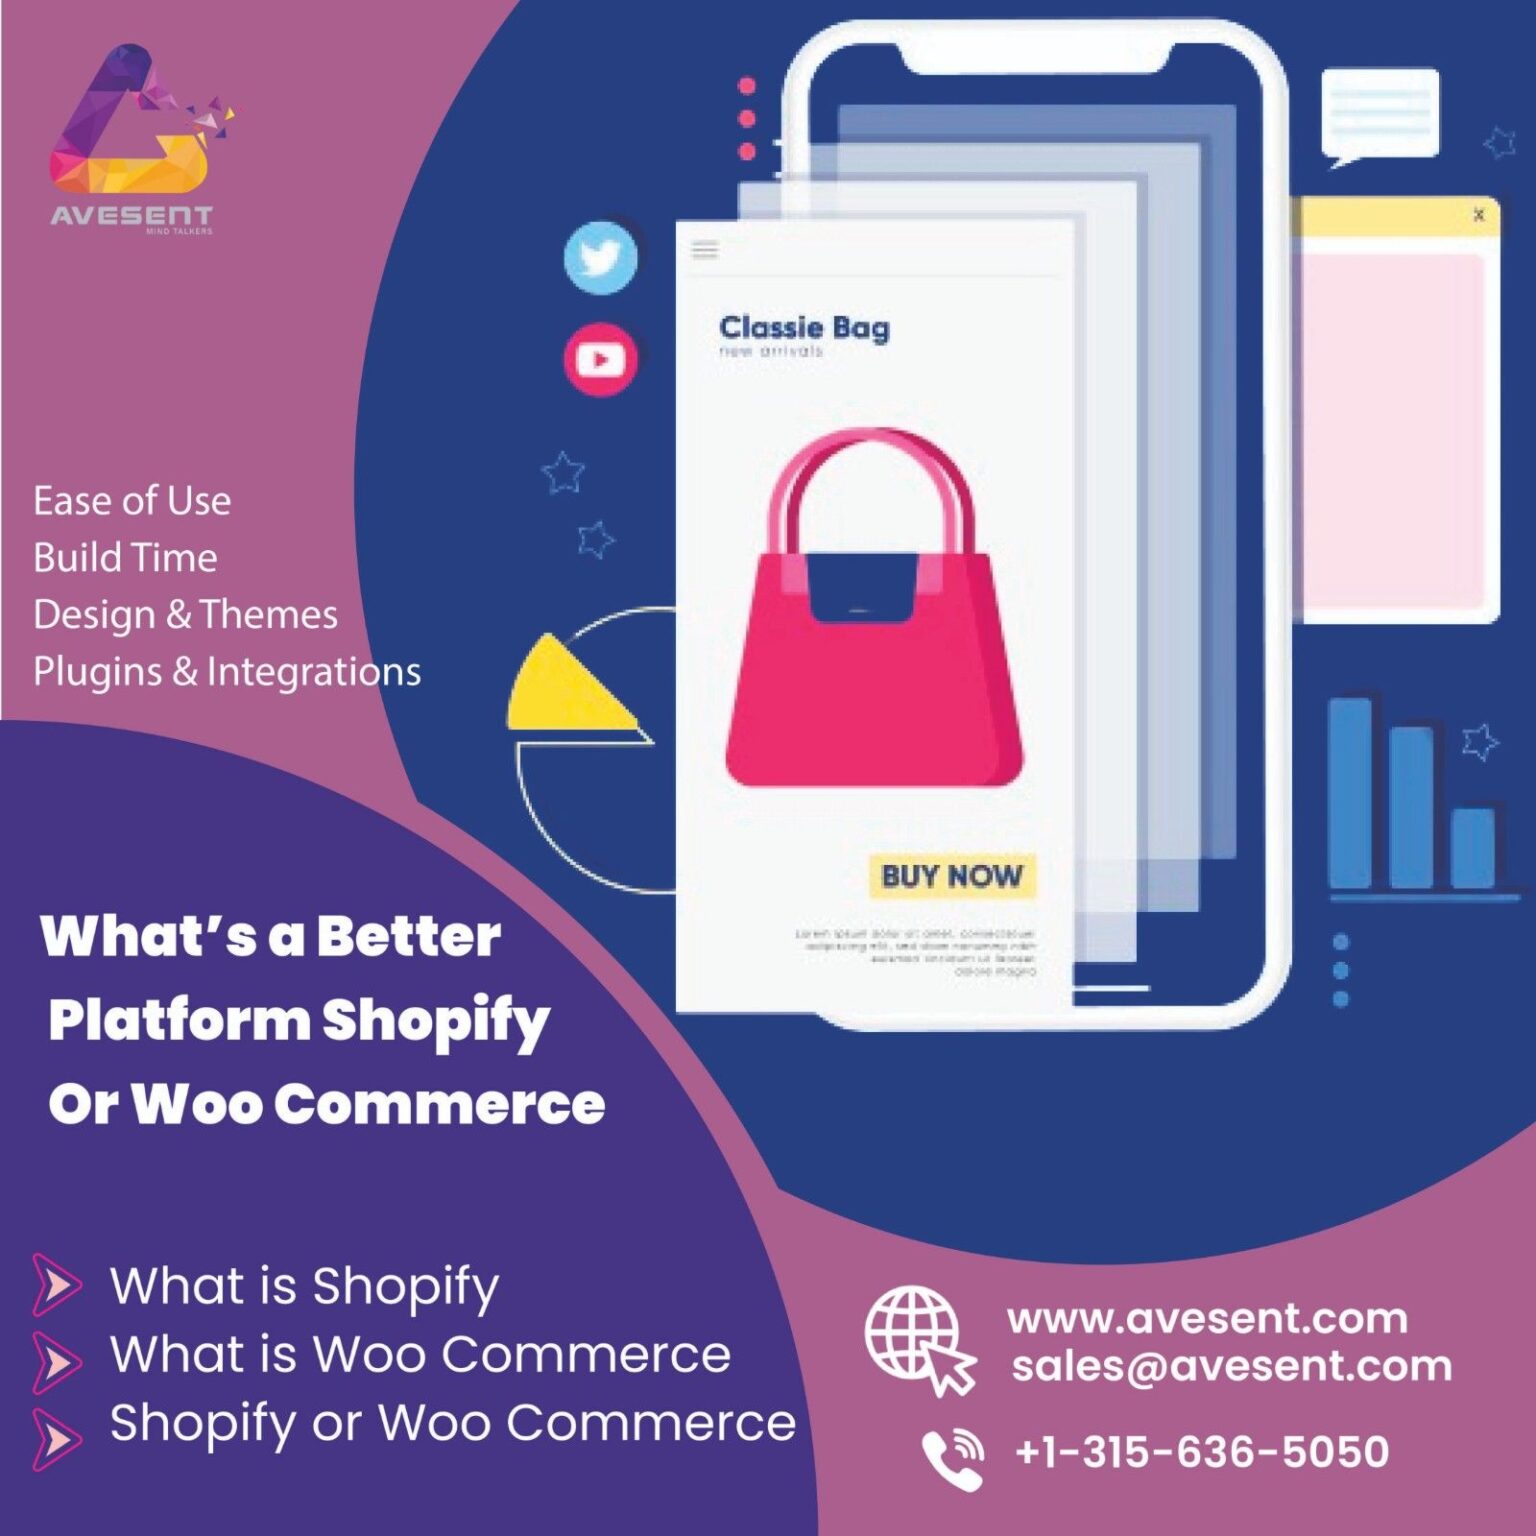 You are currently viewing What’s a Better Platform Shopify or Woo Commerce?